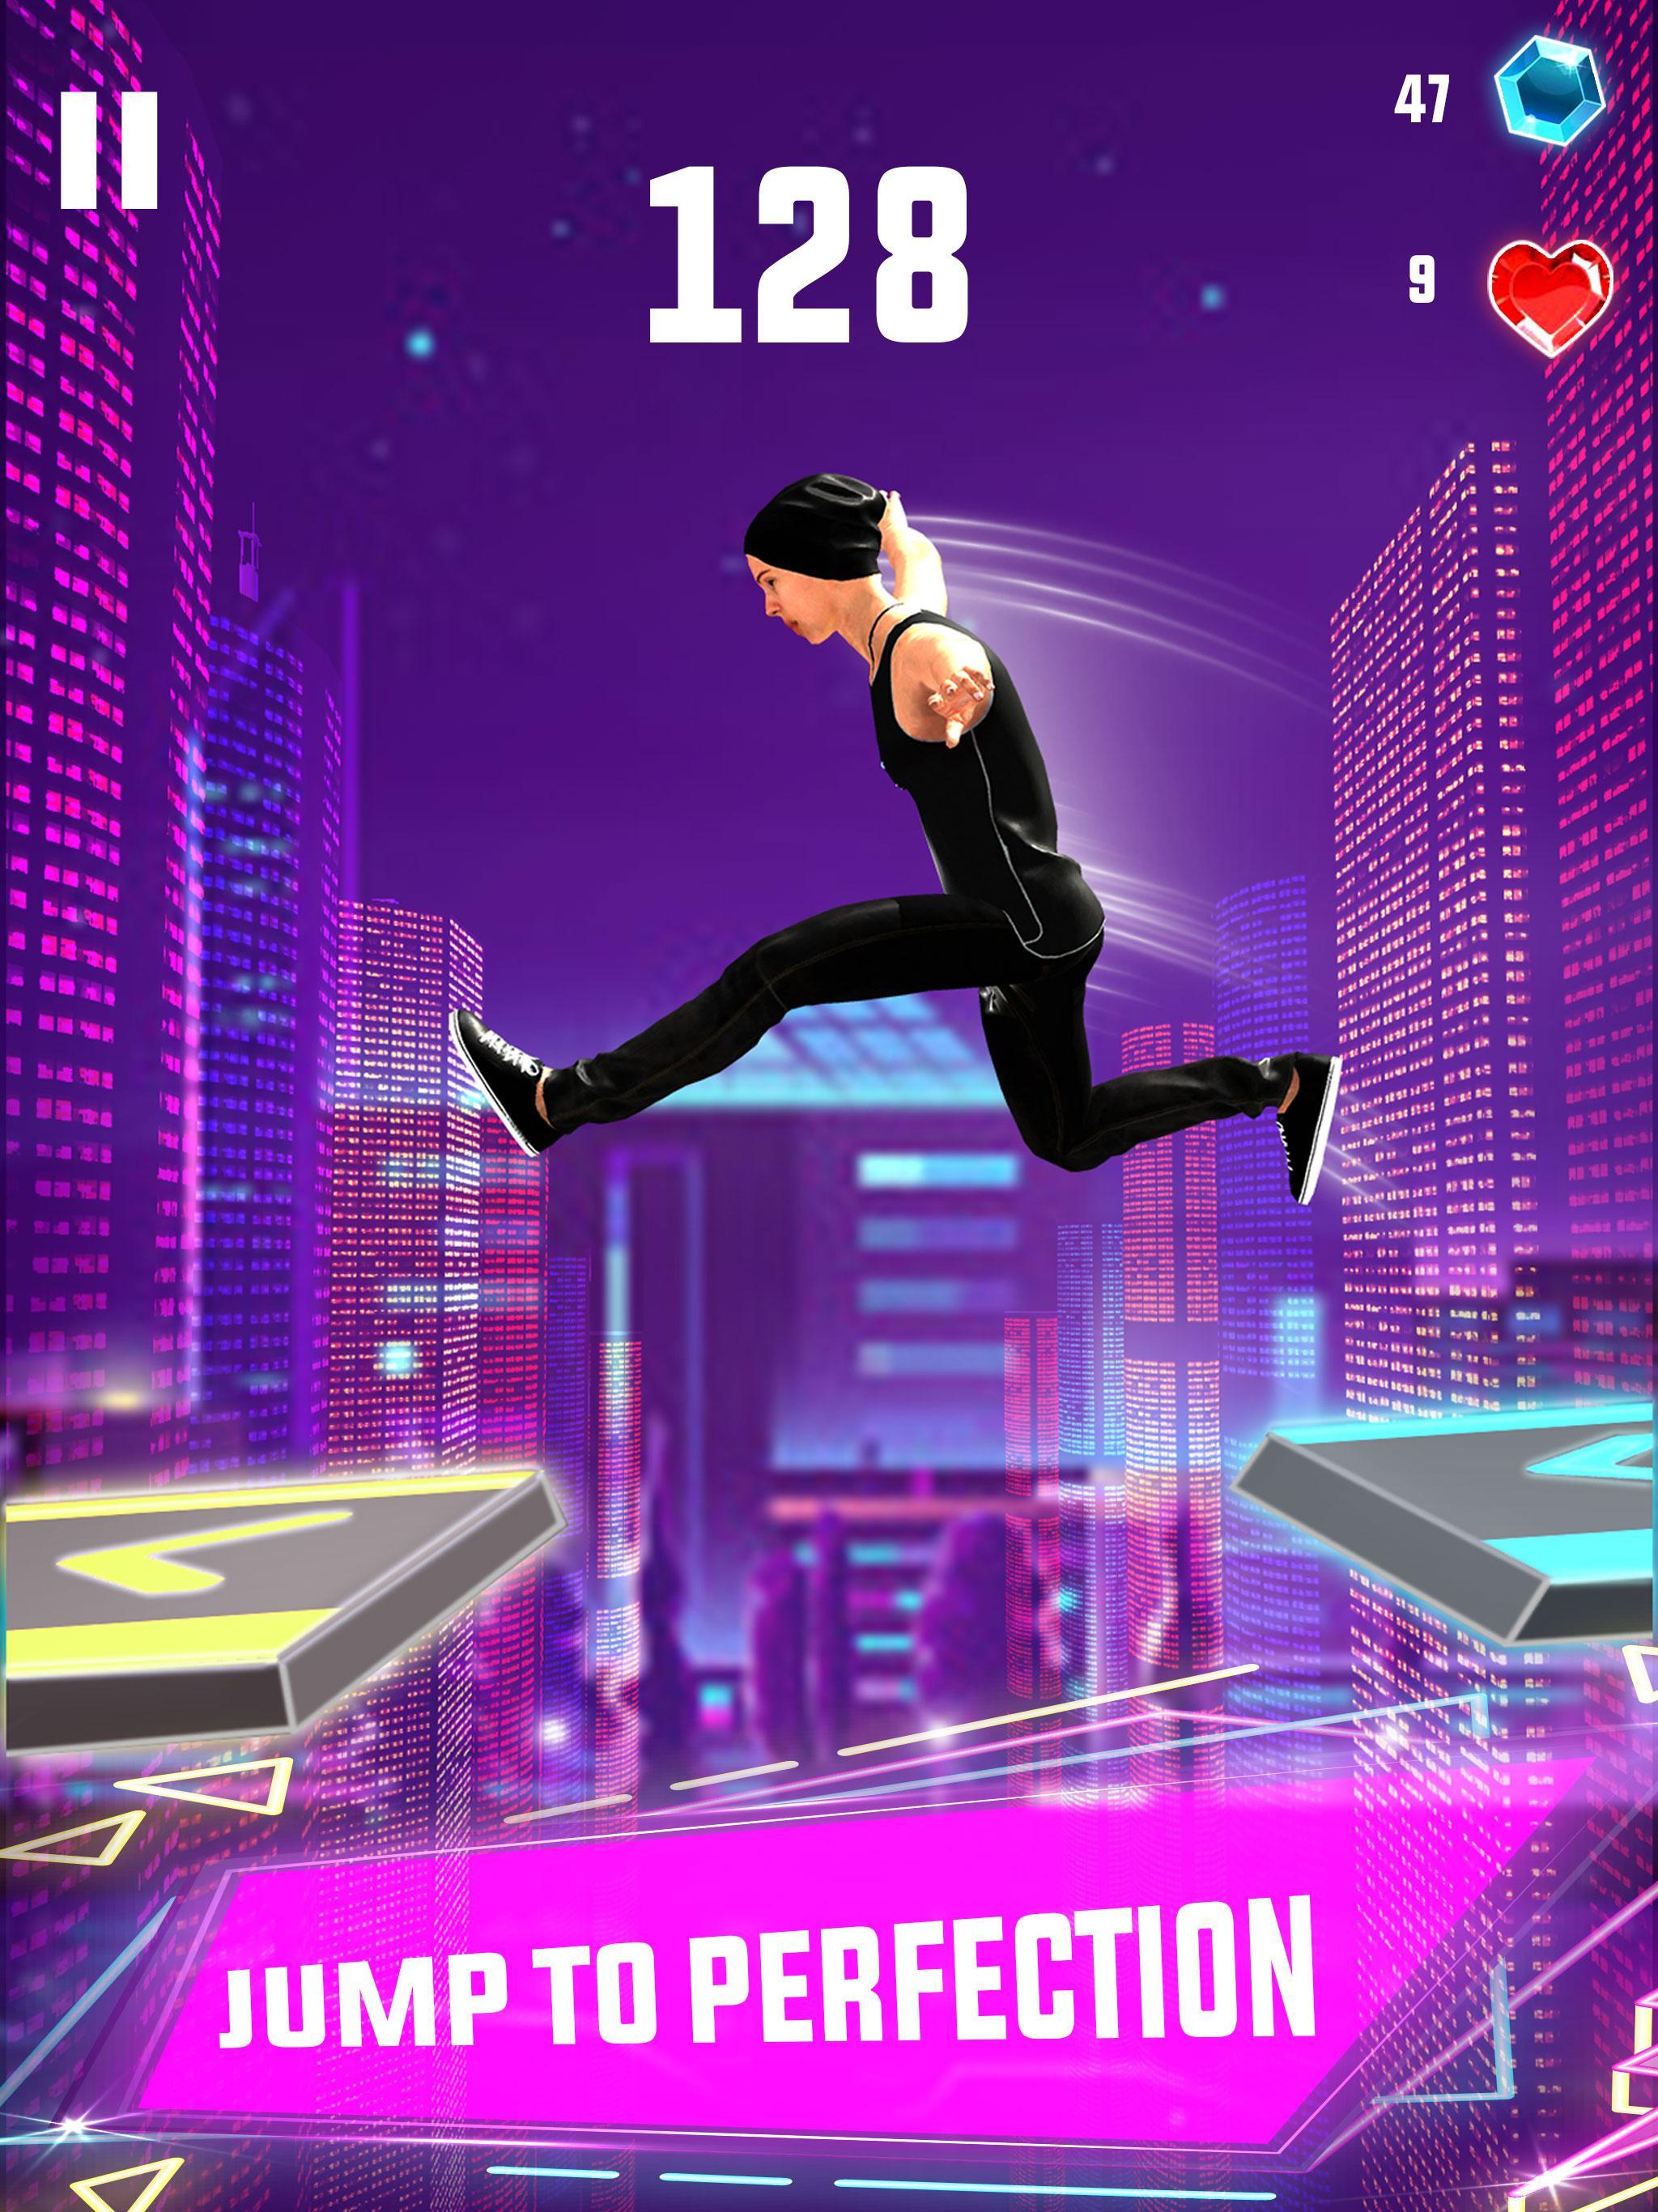 Sky Jumper Parkour Mania Free Running Game 3d For Android Apk Download - sky jumper roblox